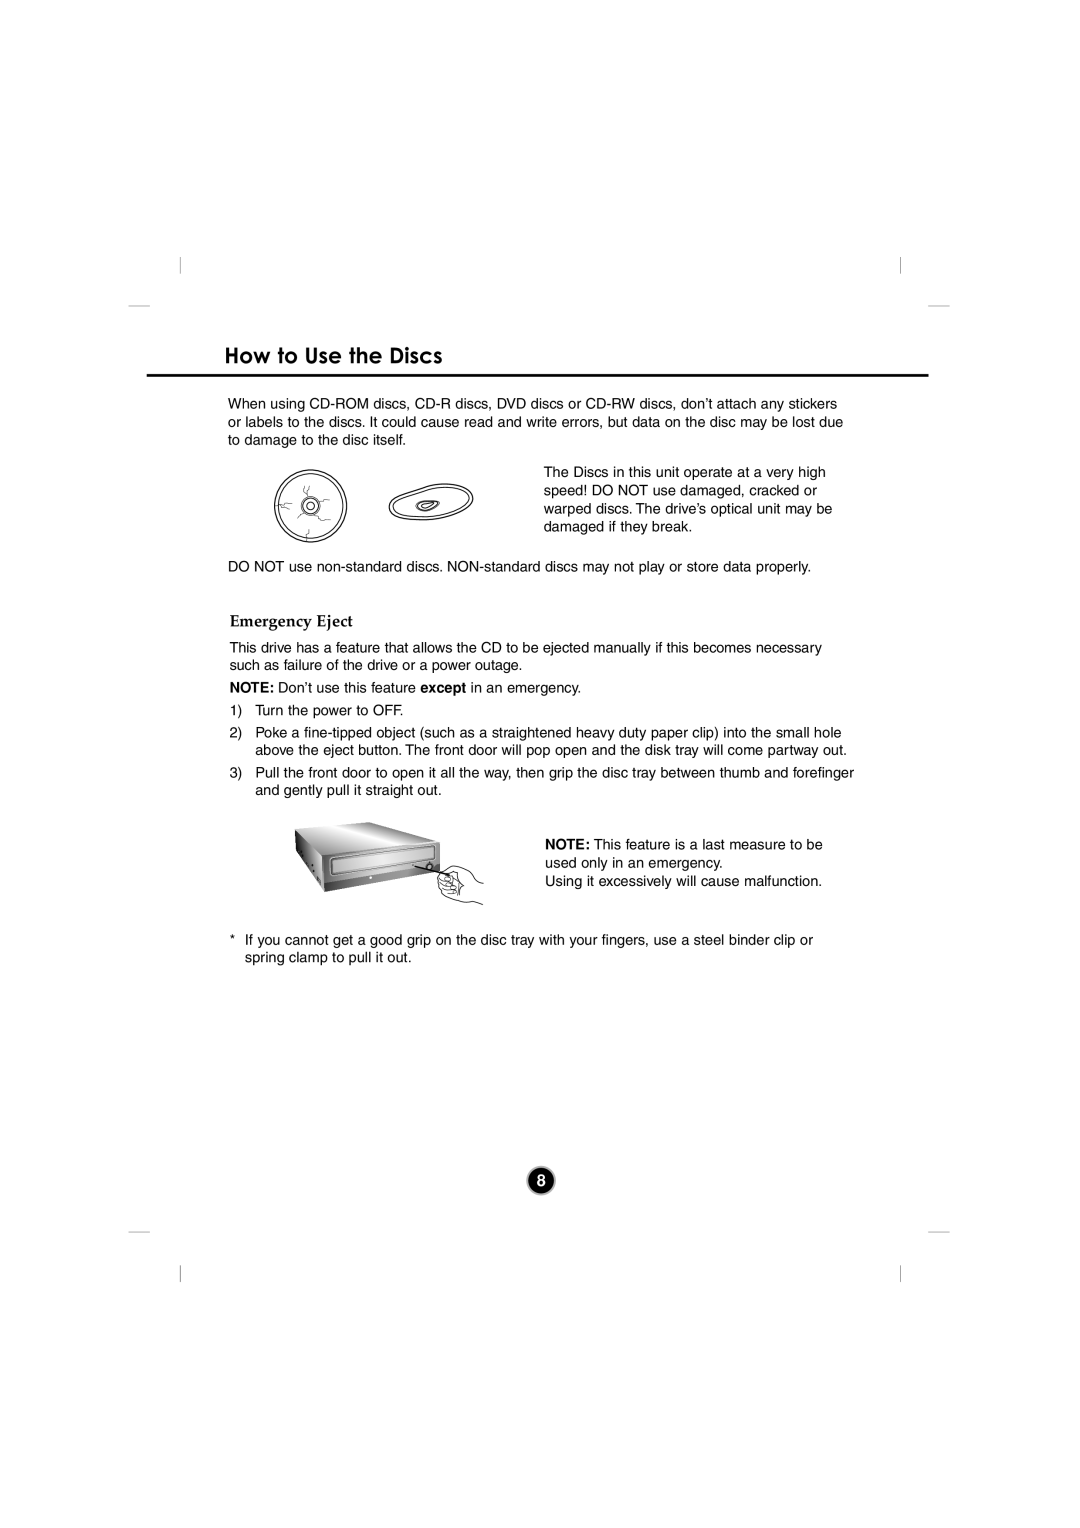 LG Electronics GSA-4082B manual How to Use the Discs, Emergency Eject 